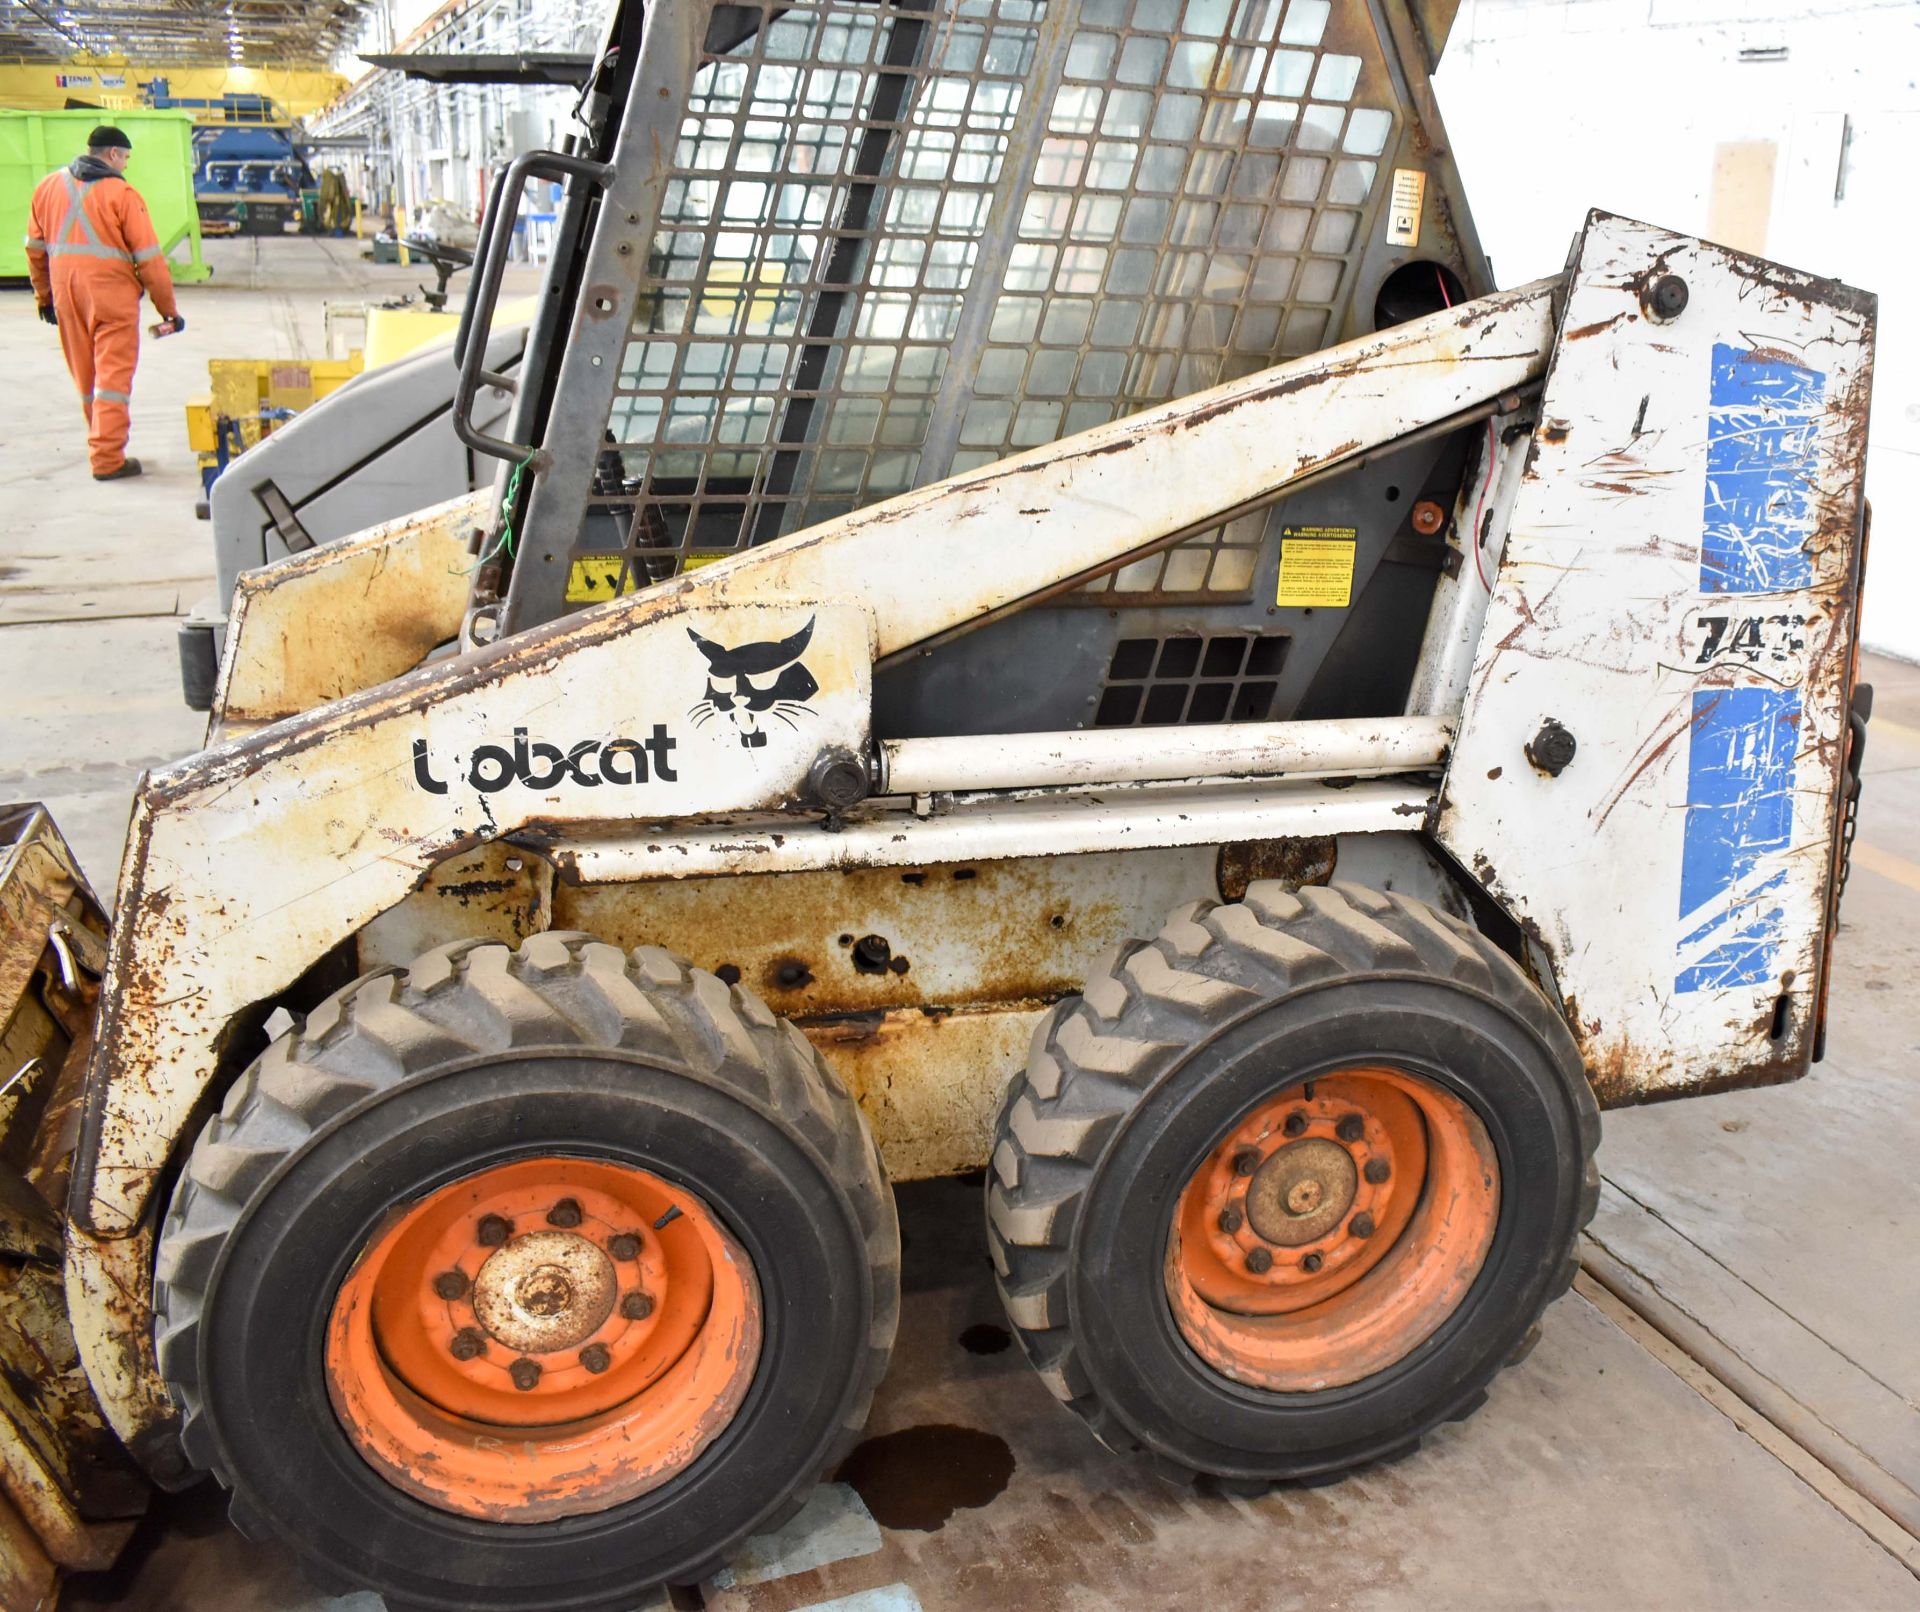 BOBCAT 743 SKID STEER LOADER WITH DIESEL ENGINE, BUCKET ATTACHMENT, PNEUMATIC TIRES, APPROX 3312 - Image 3 of 5